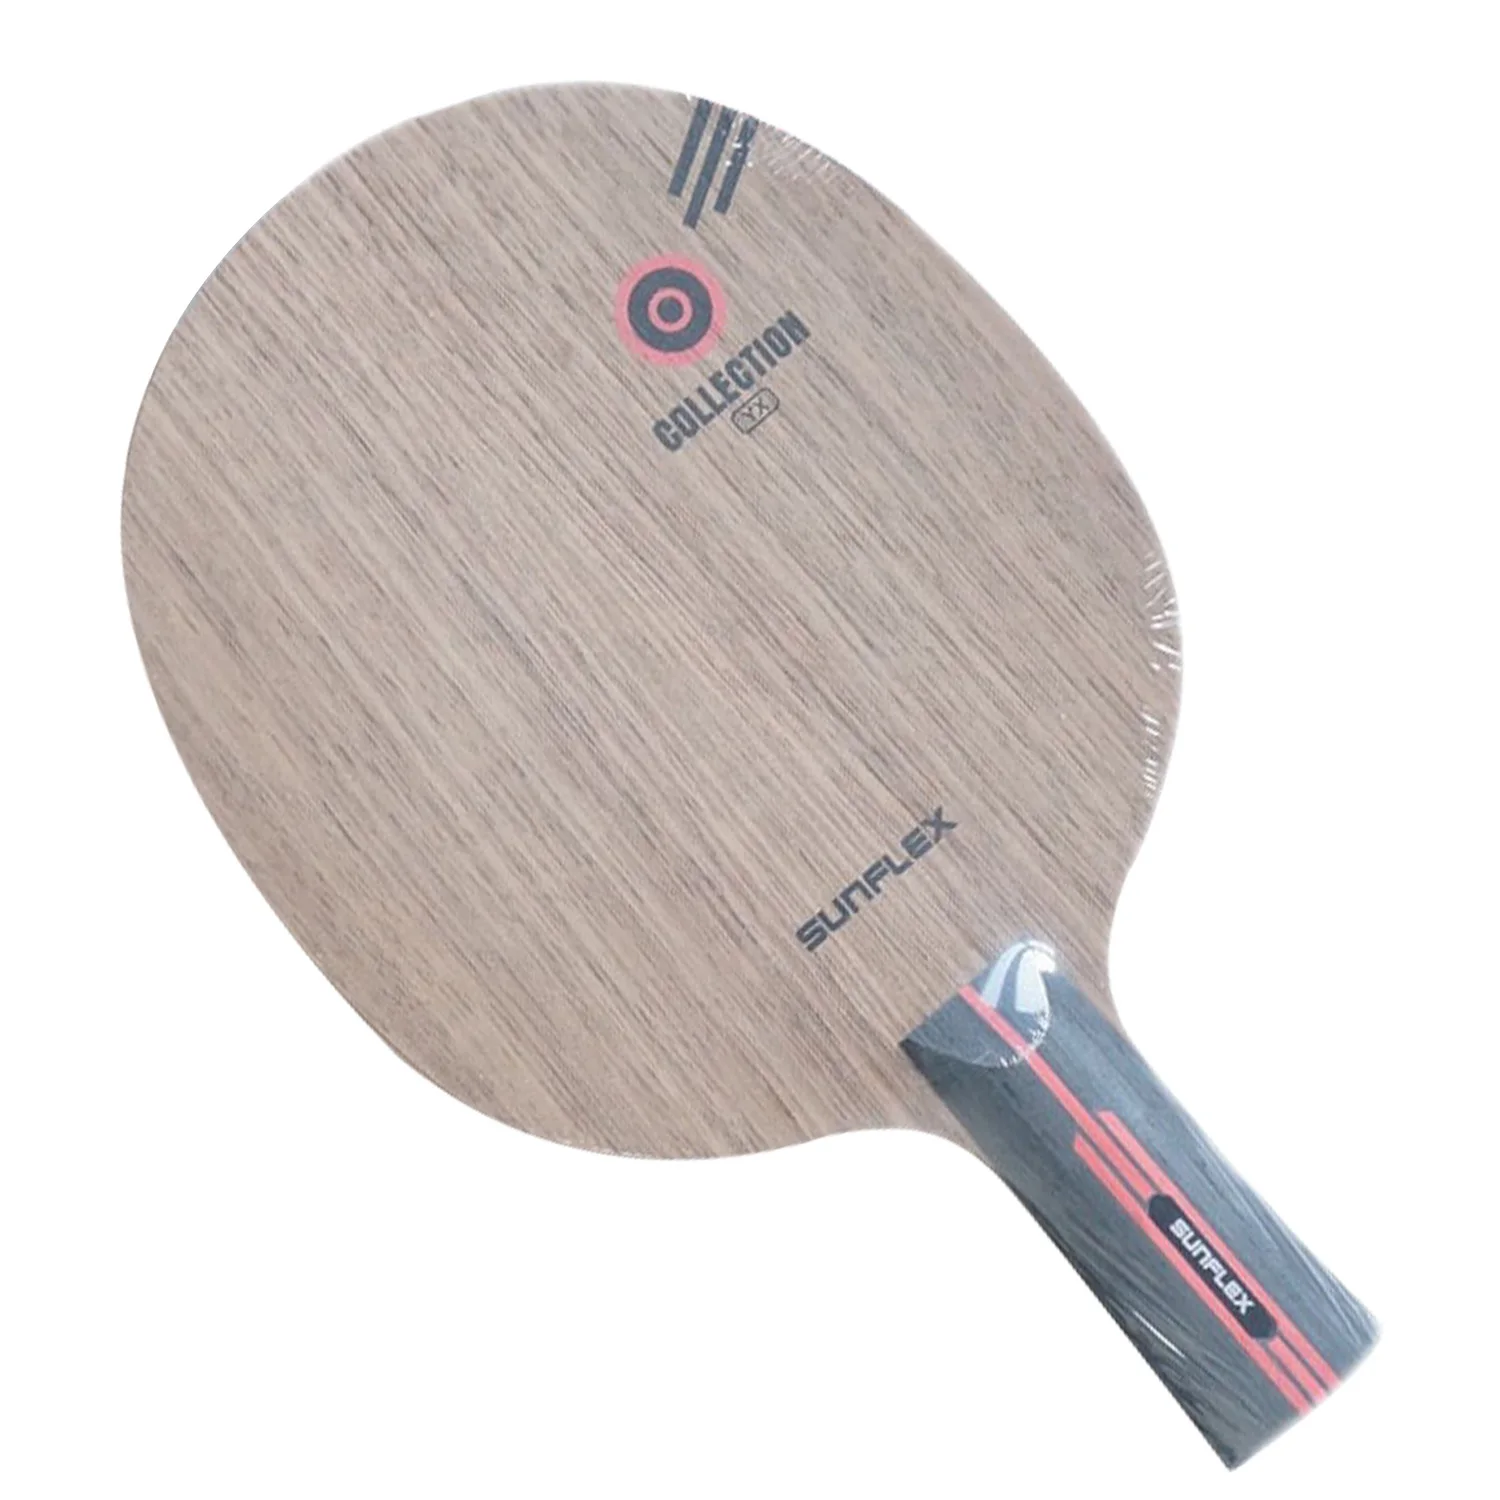 SUNFLEX COLLECTION YX Table Tennis Blade 5 Ply pure Wood Racket Ping Pong Bat Tenis De Mesa Paddle